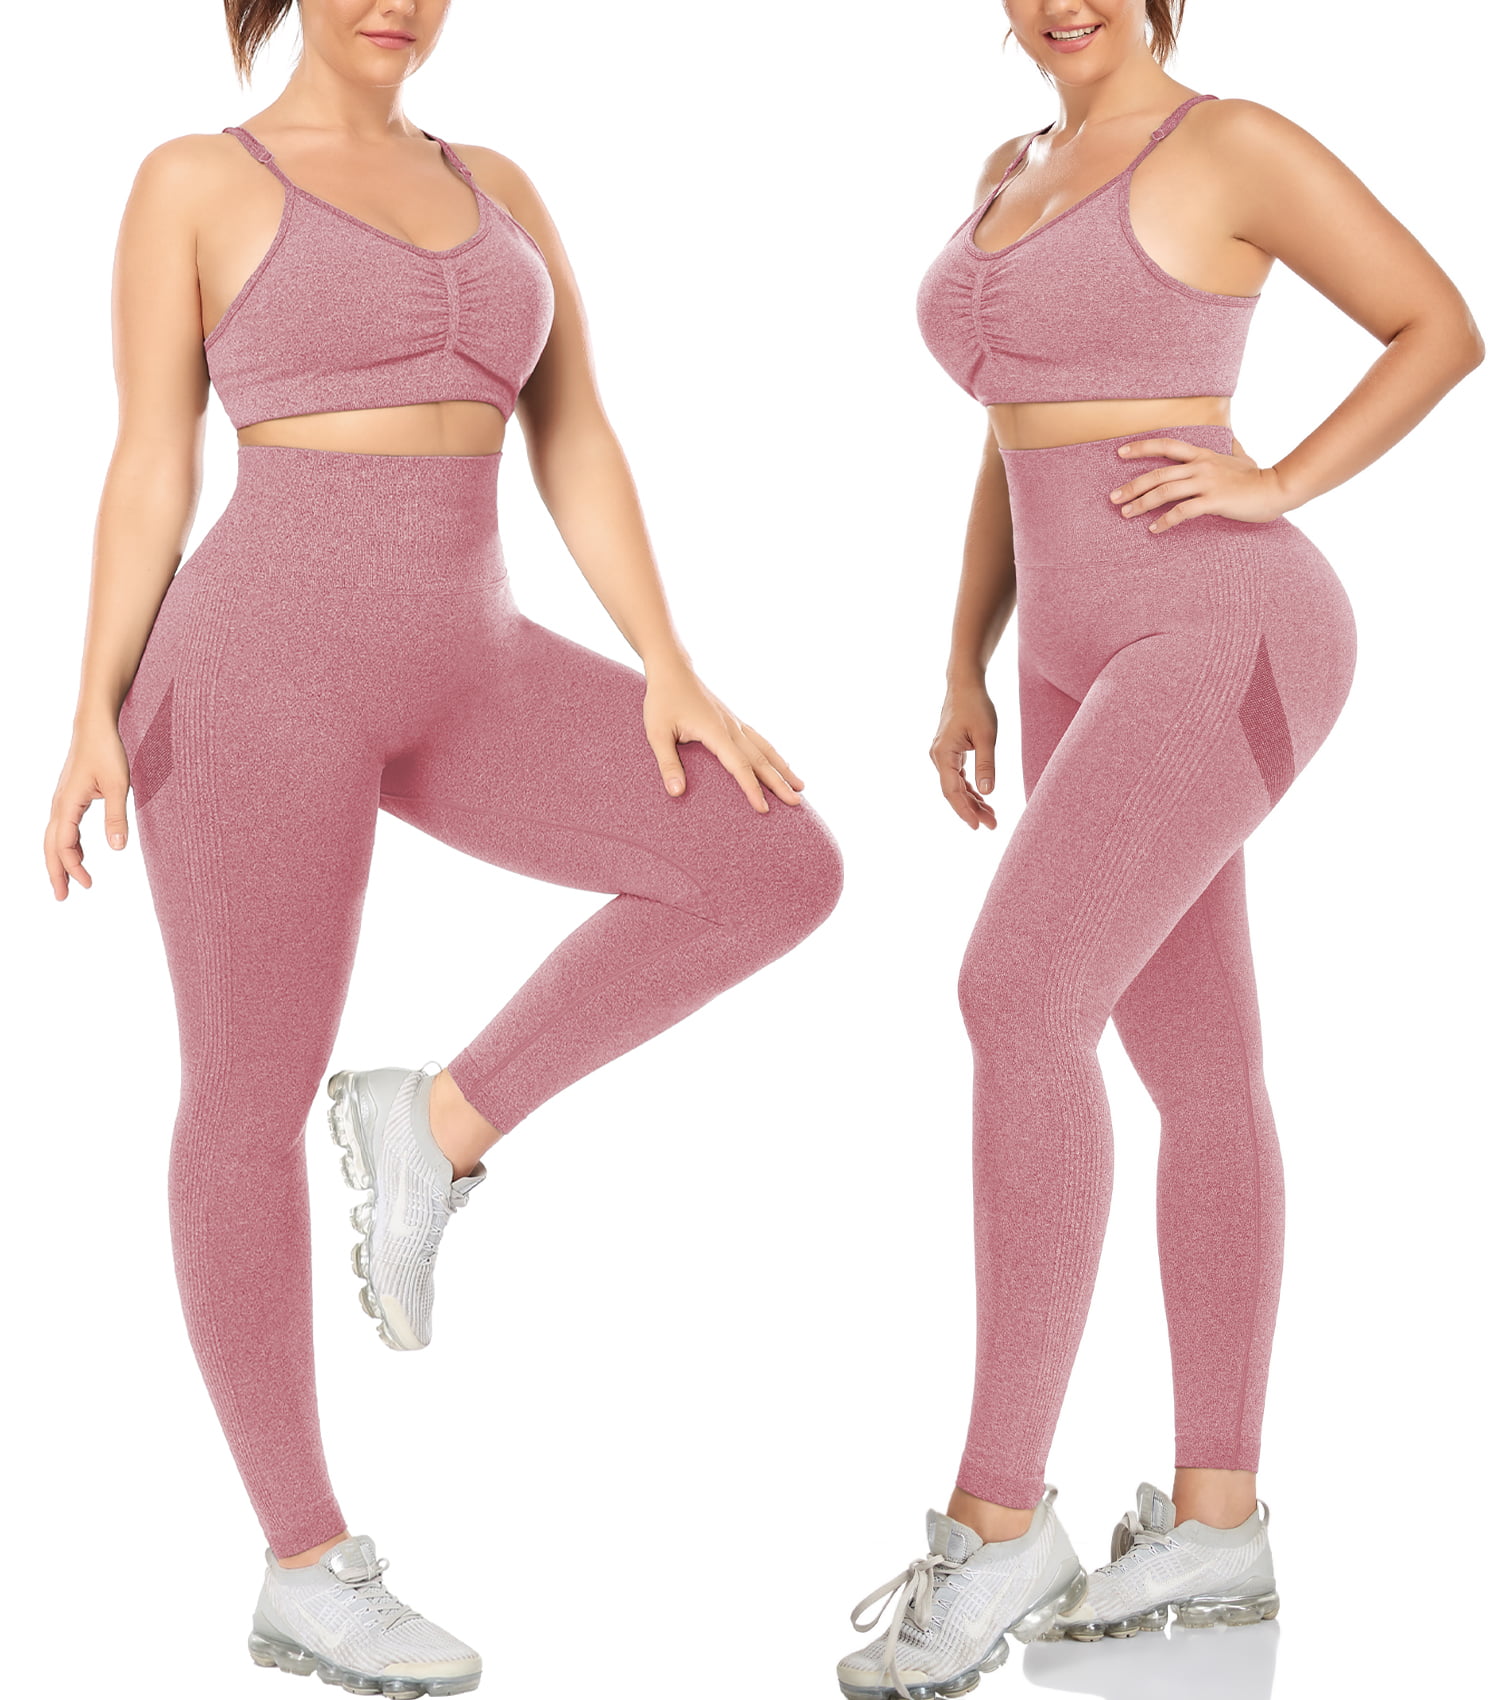 Women's Workout Sets 2 Piece Color Gradient Clothing Suit Black Pink  Spandex Yoga Fitness Gym Workout Tummy Control Butt Lift Breathable  Sleeveless Sp